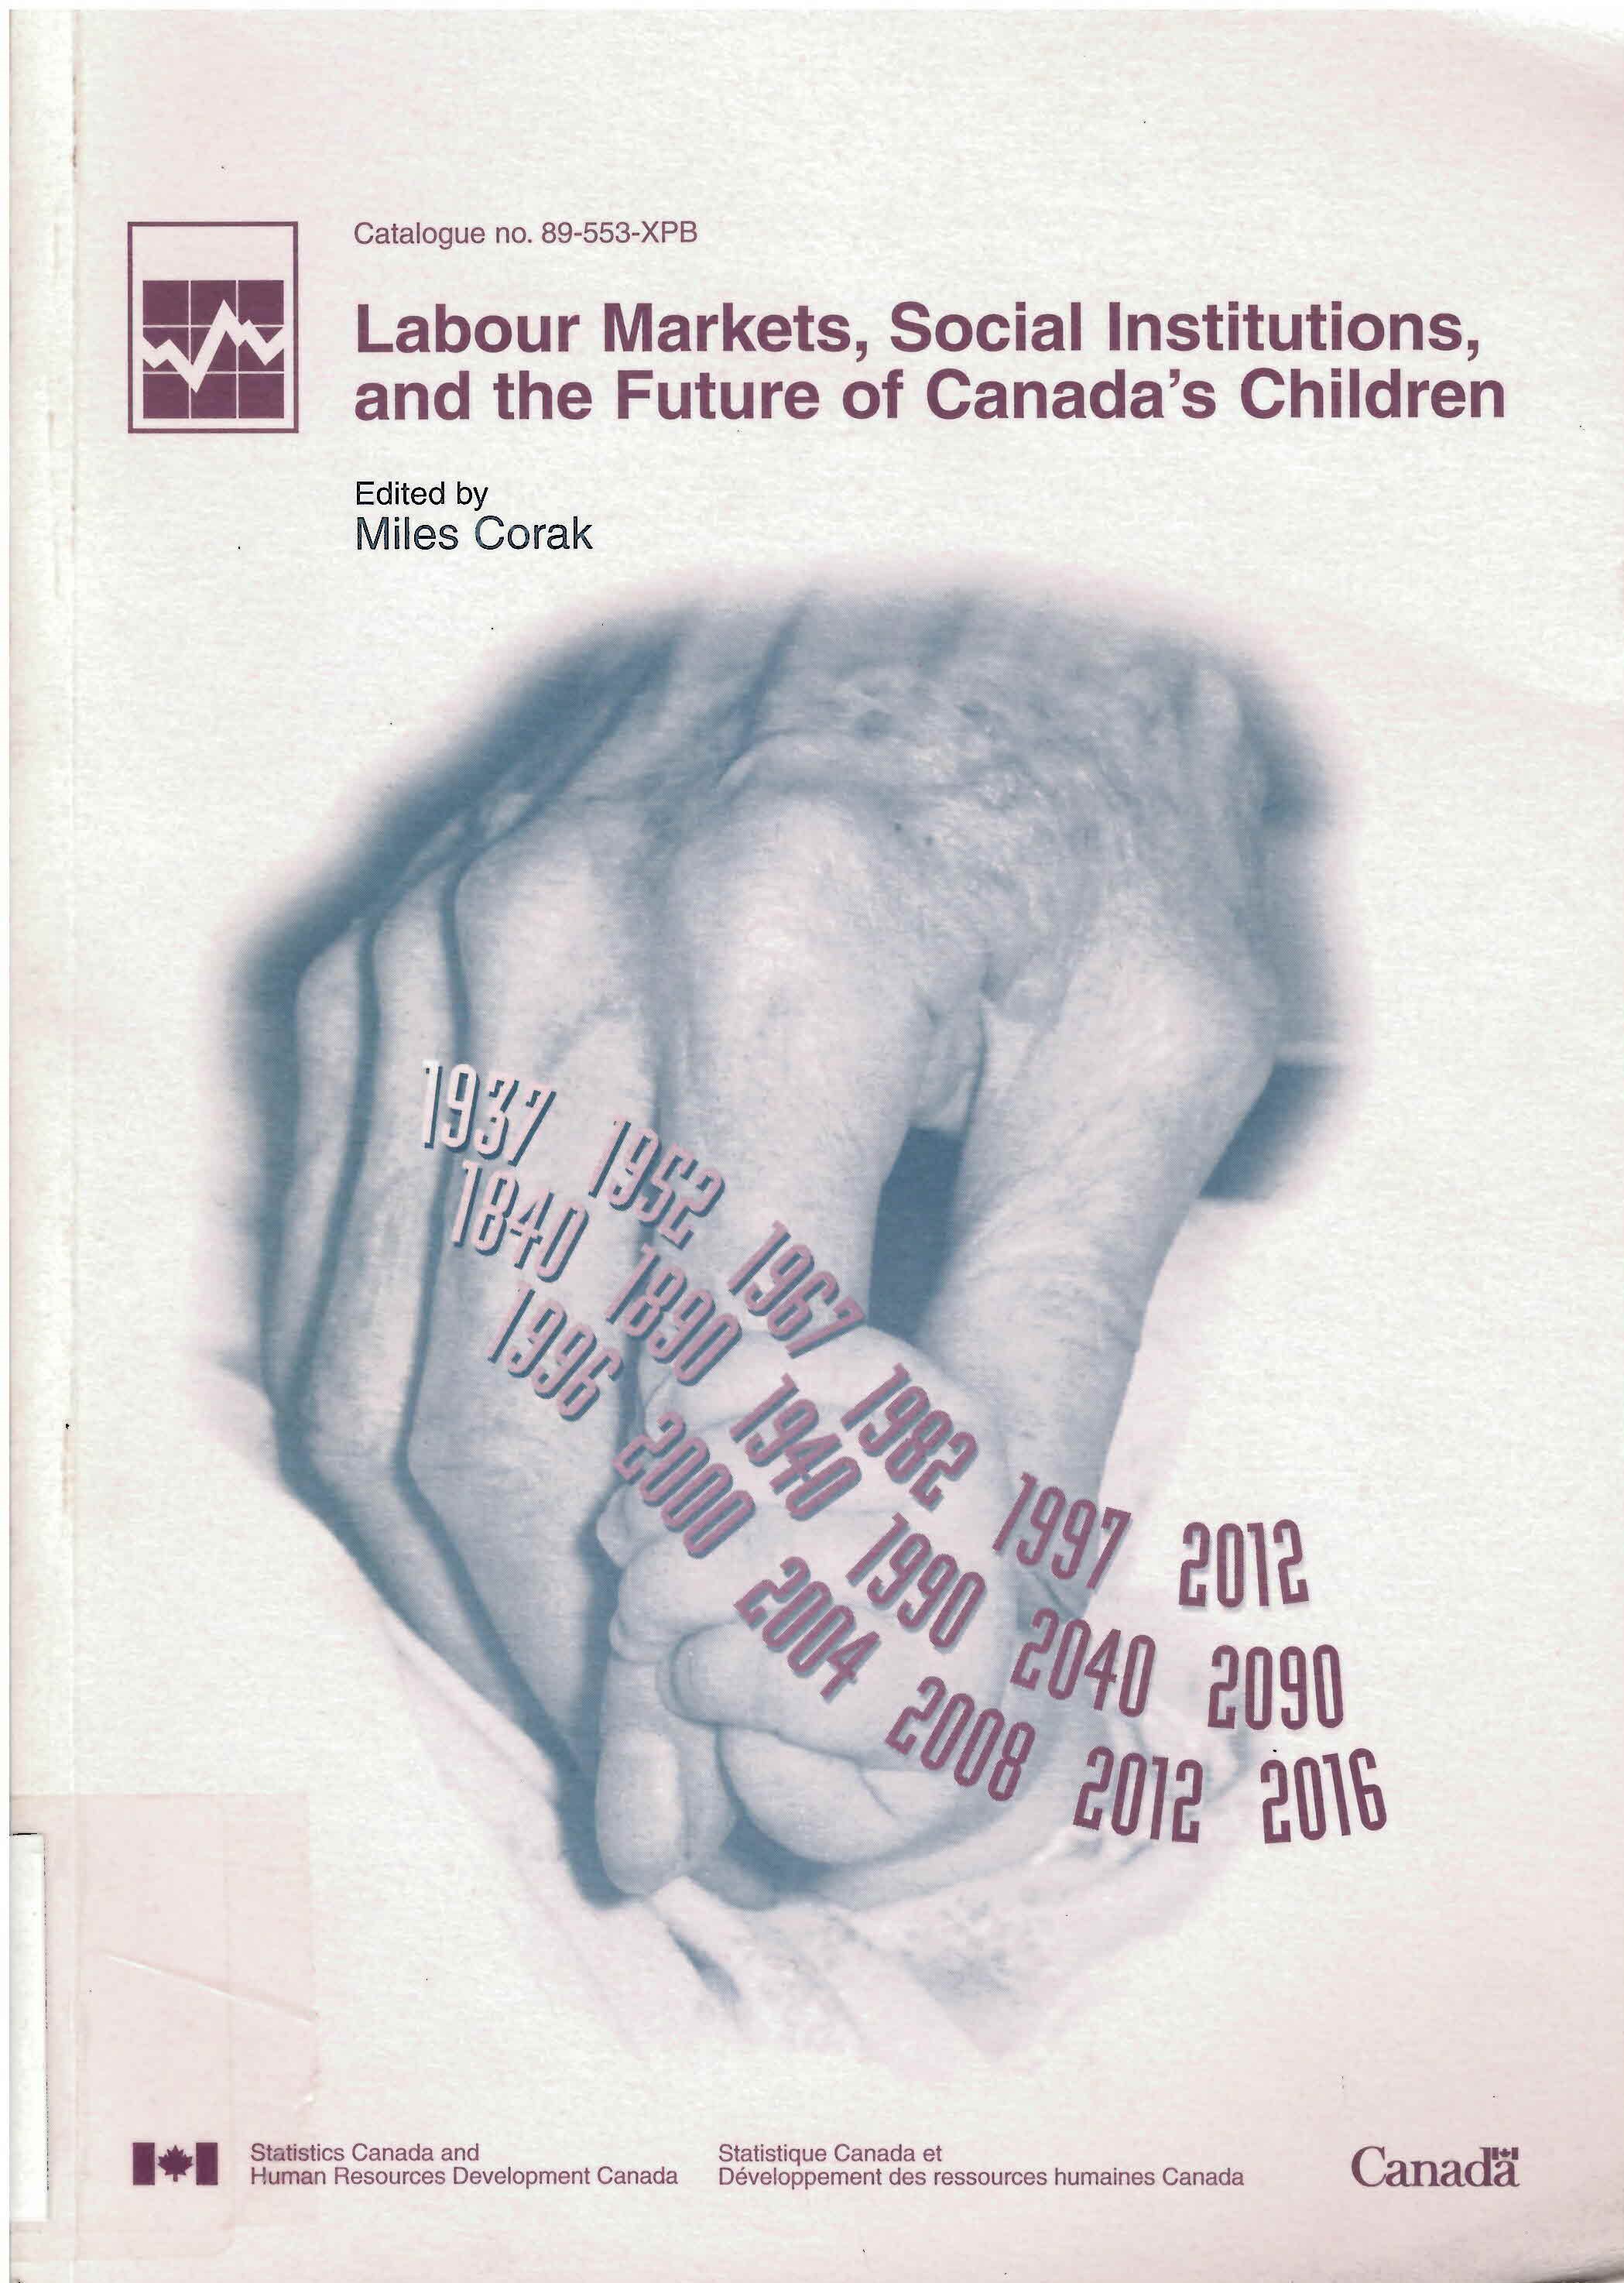 Labour markets, social institutions, and the future of Canada's children